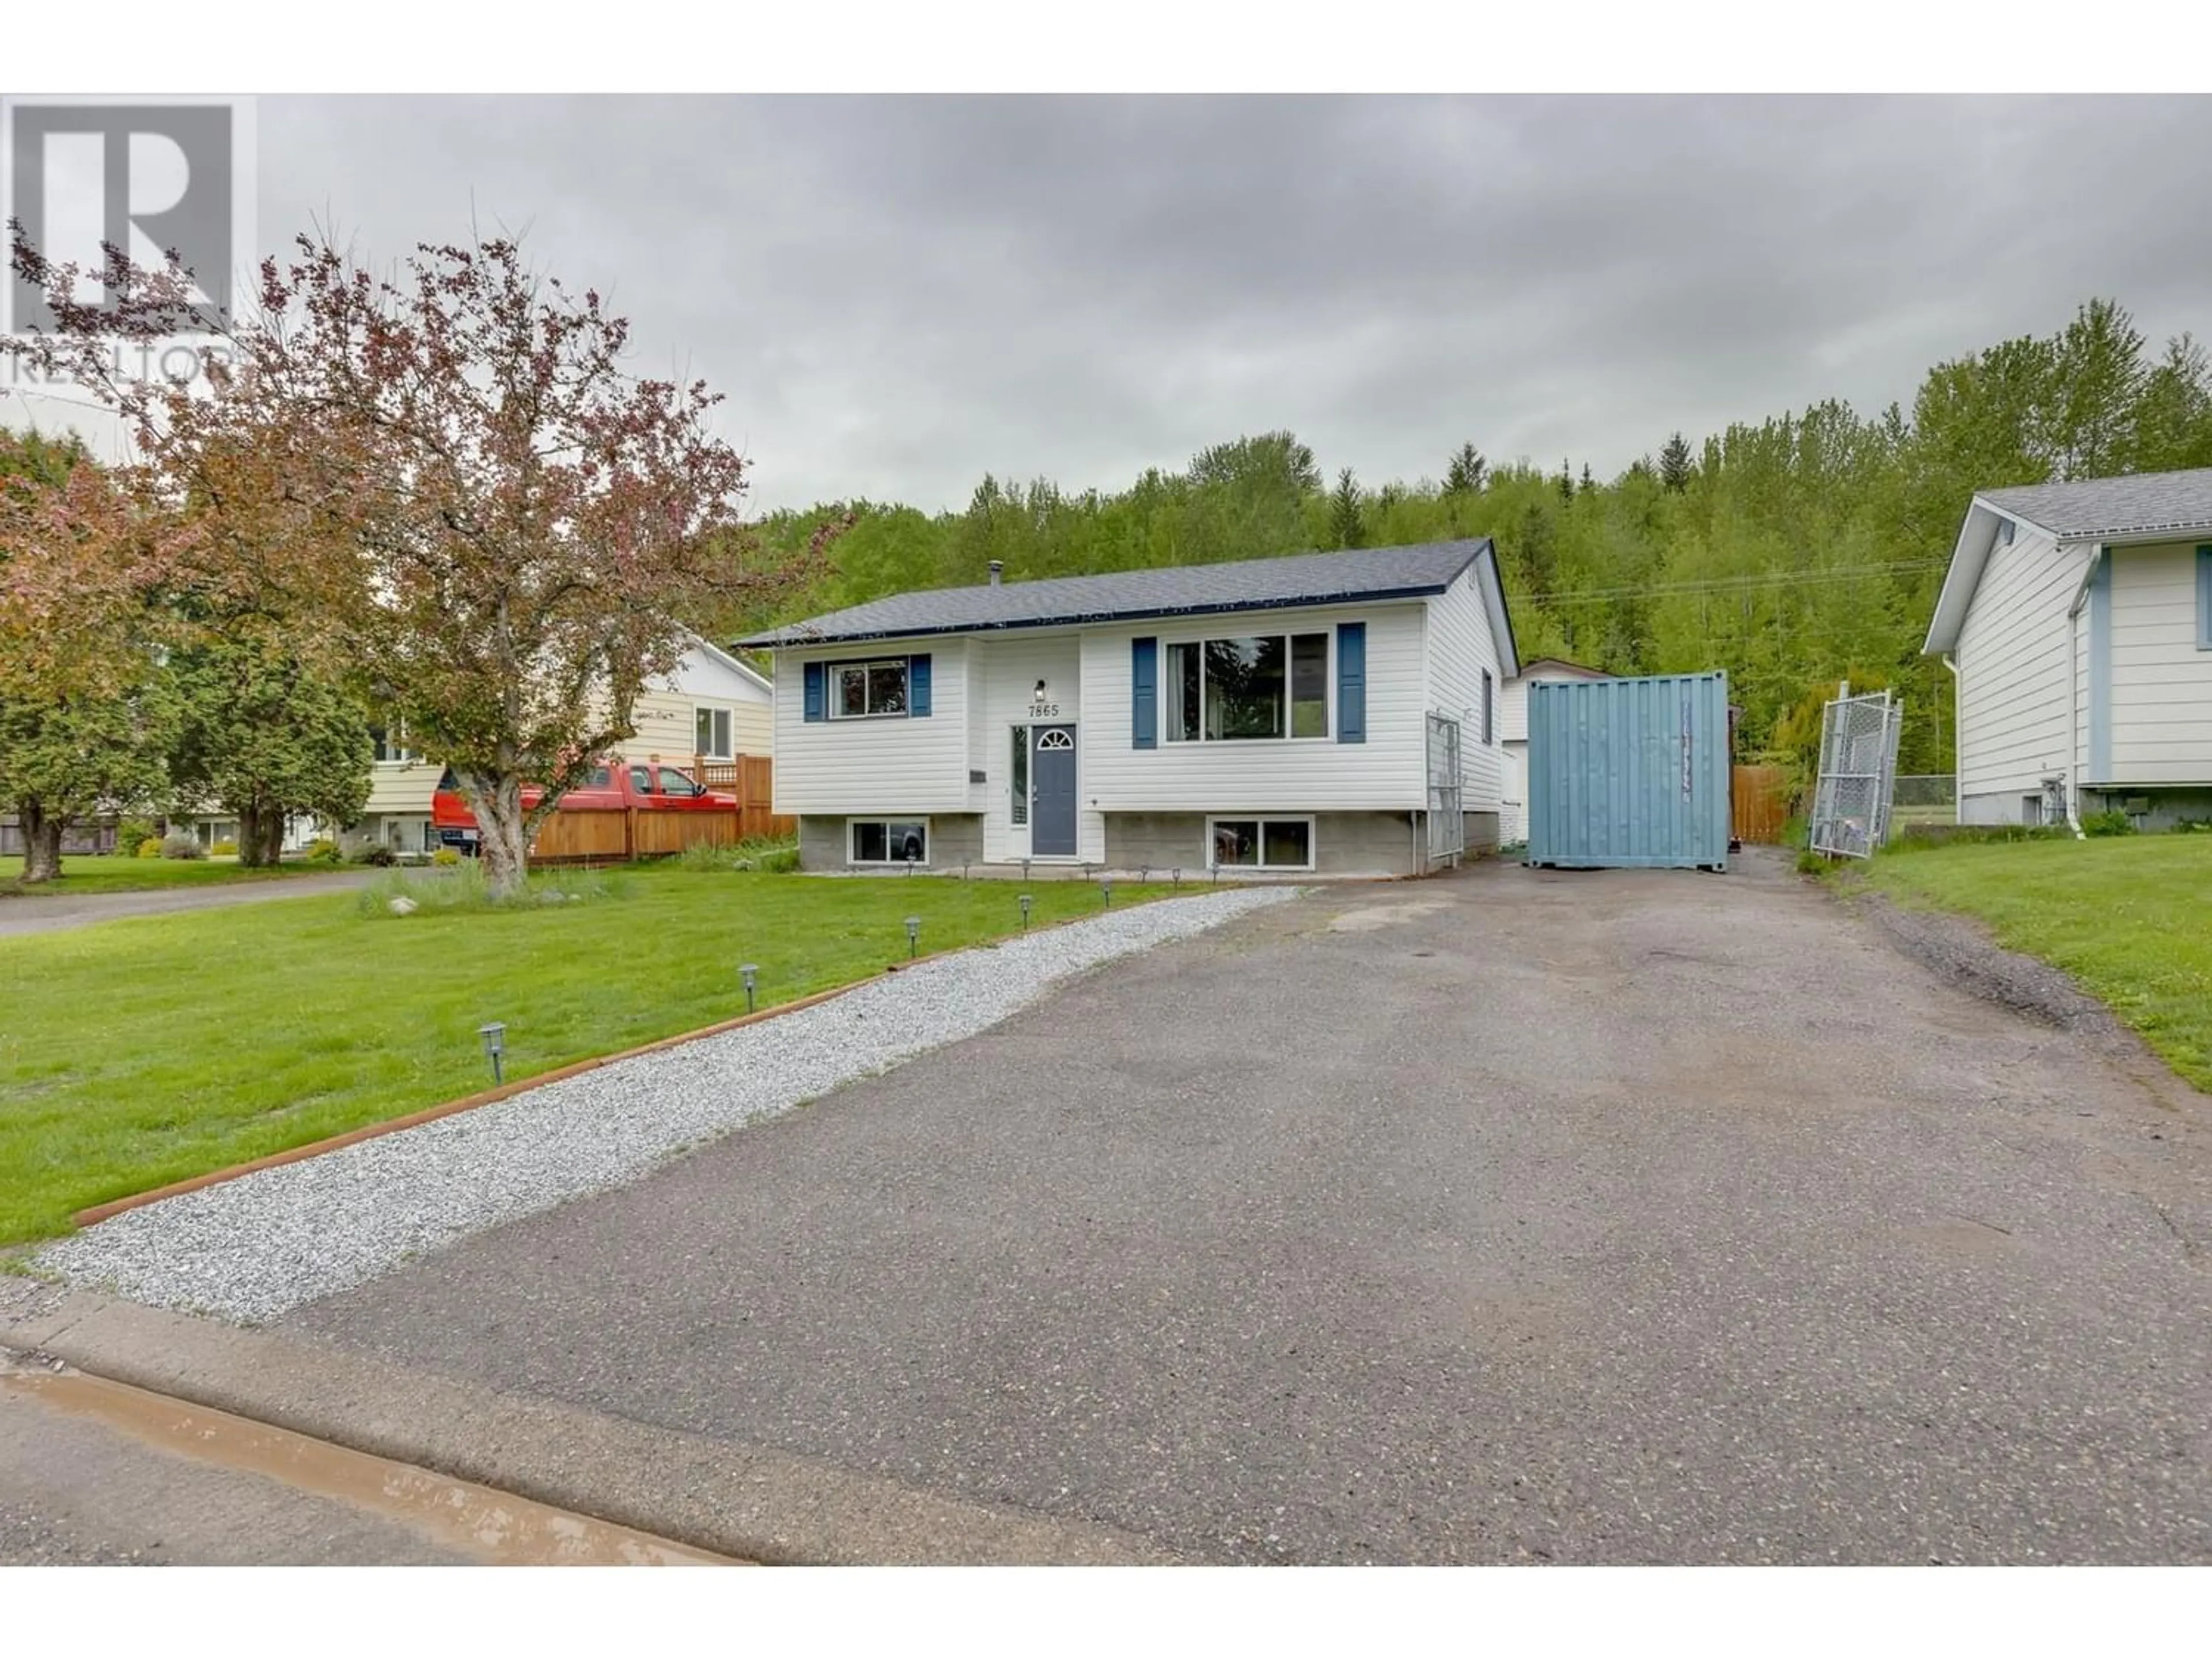 Frontside or backside of a home for 7865 QUEENS CRESCENT, Prince George British Columbia V2N3H5